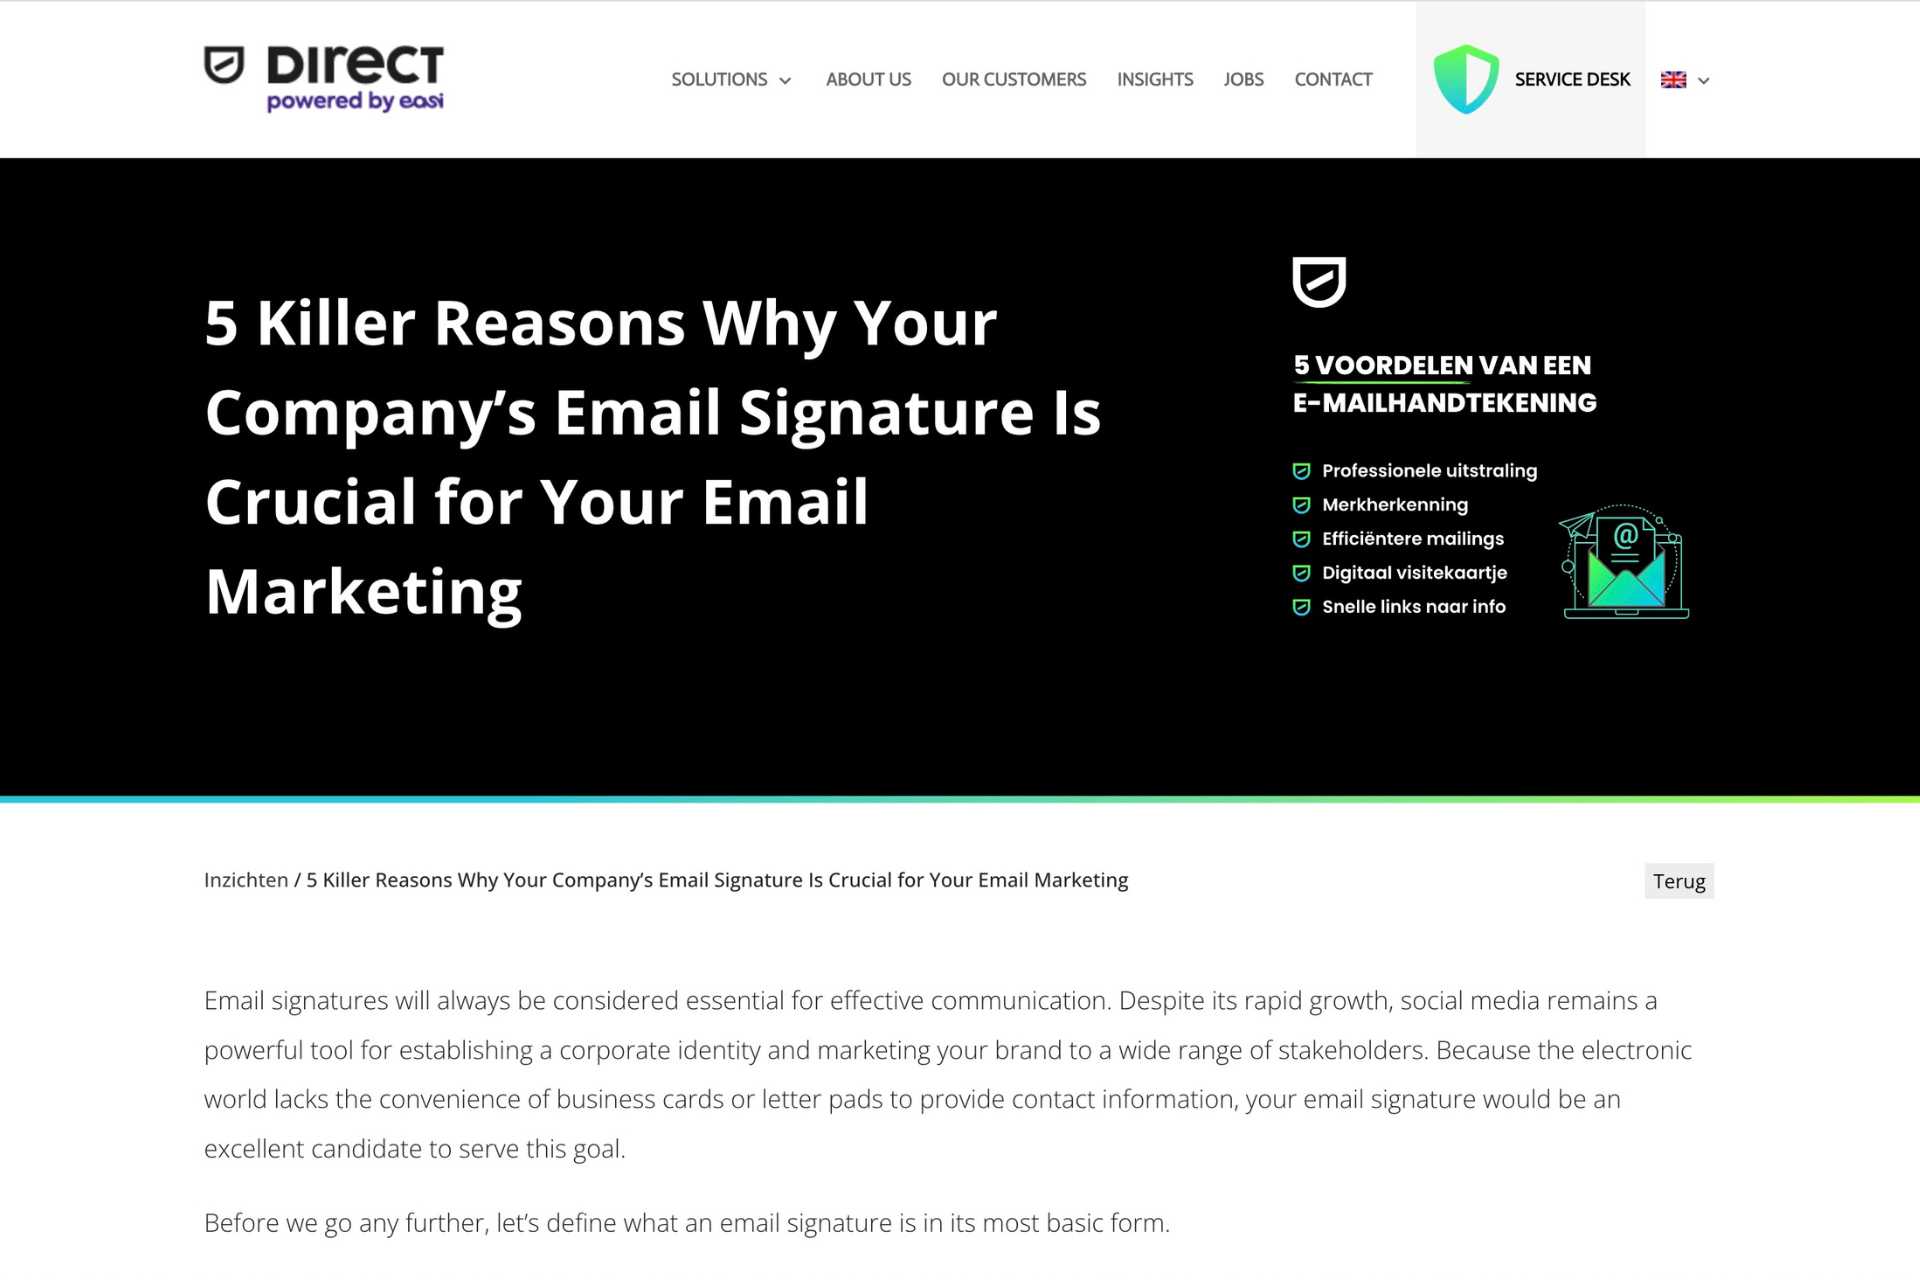 5 killer reasons why your company's email signature is crucial for your email marketing